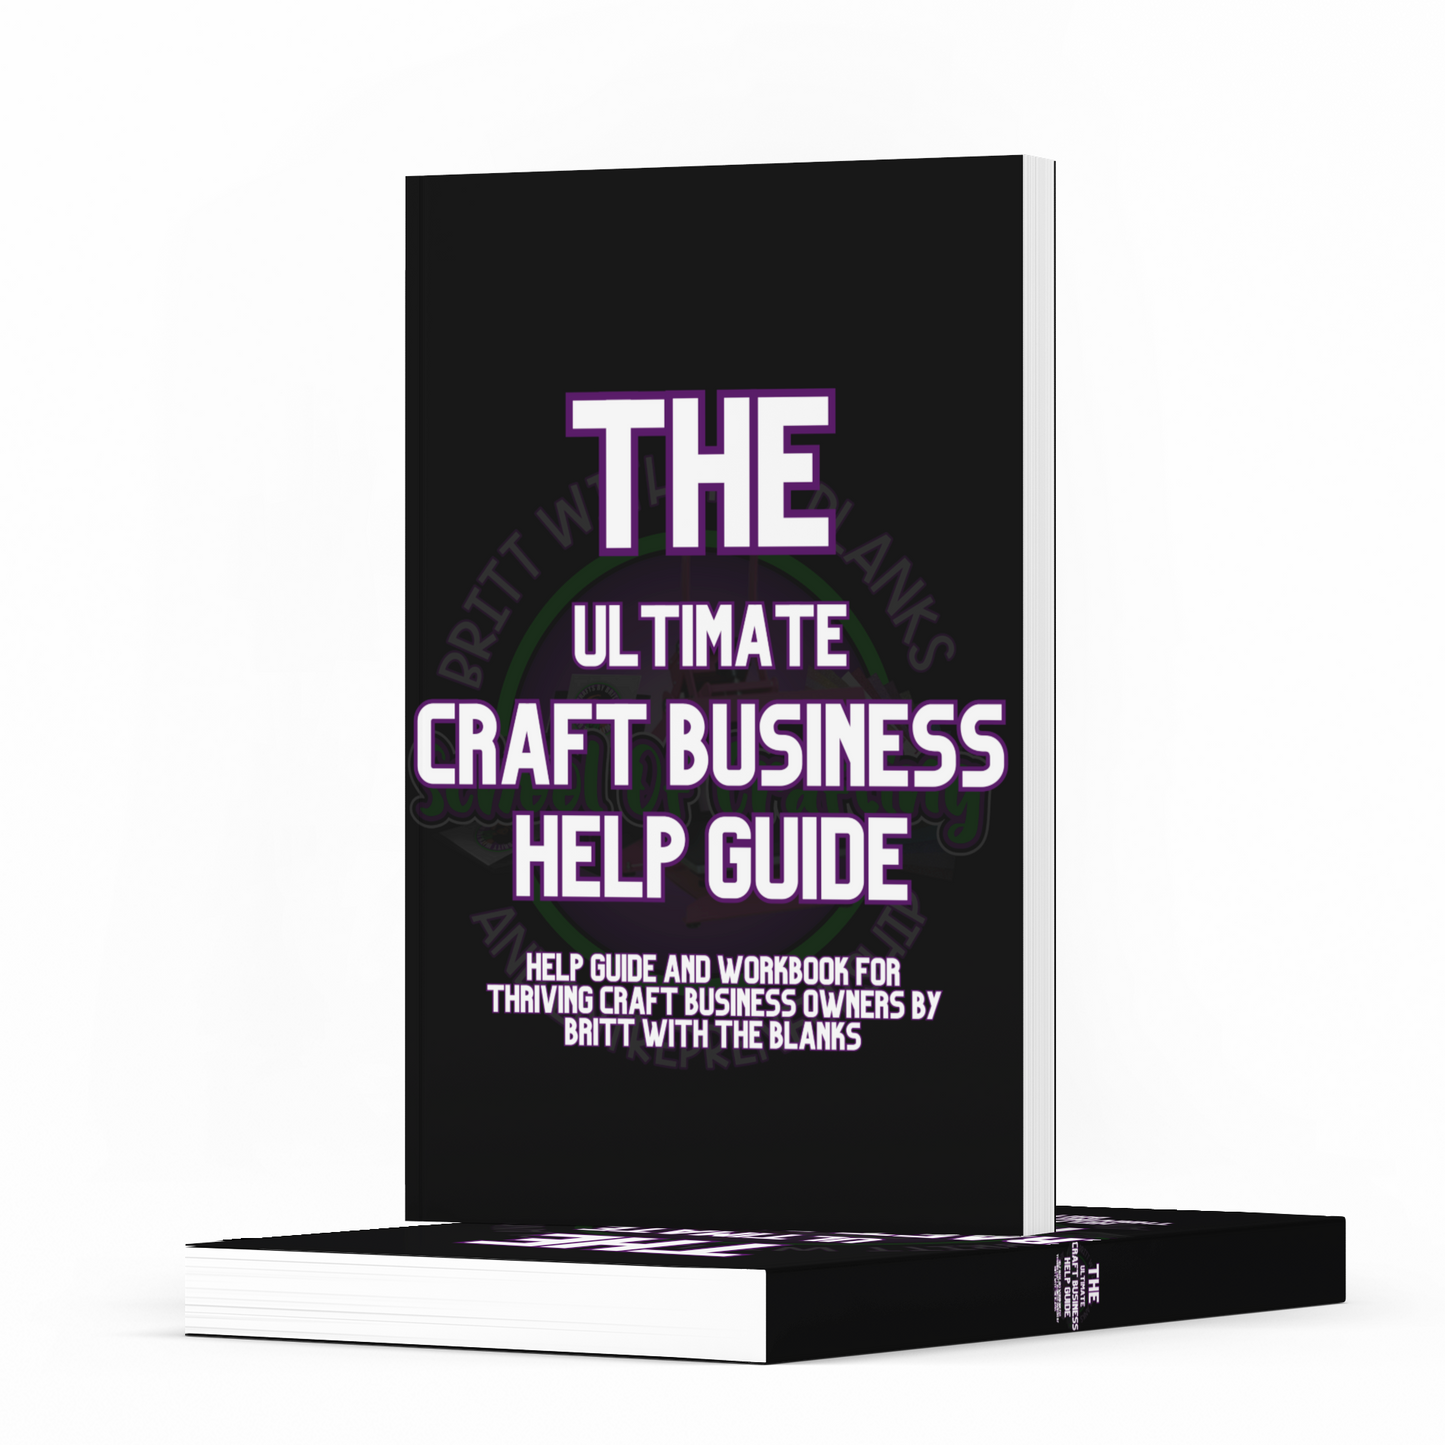 The Ultimate Craft Business Help Guide